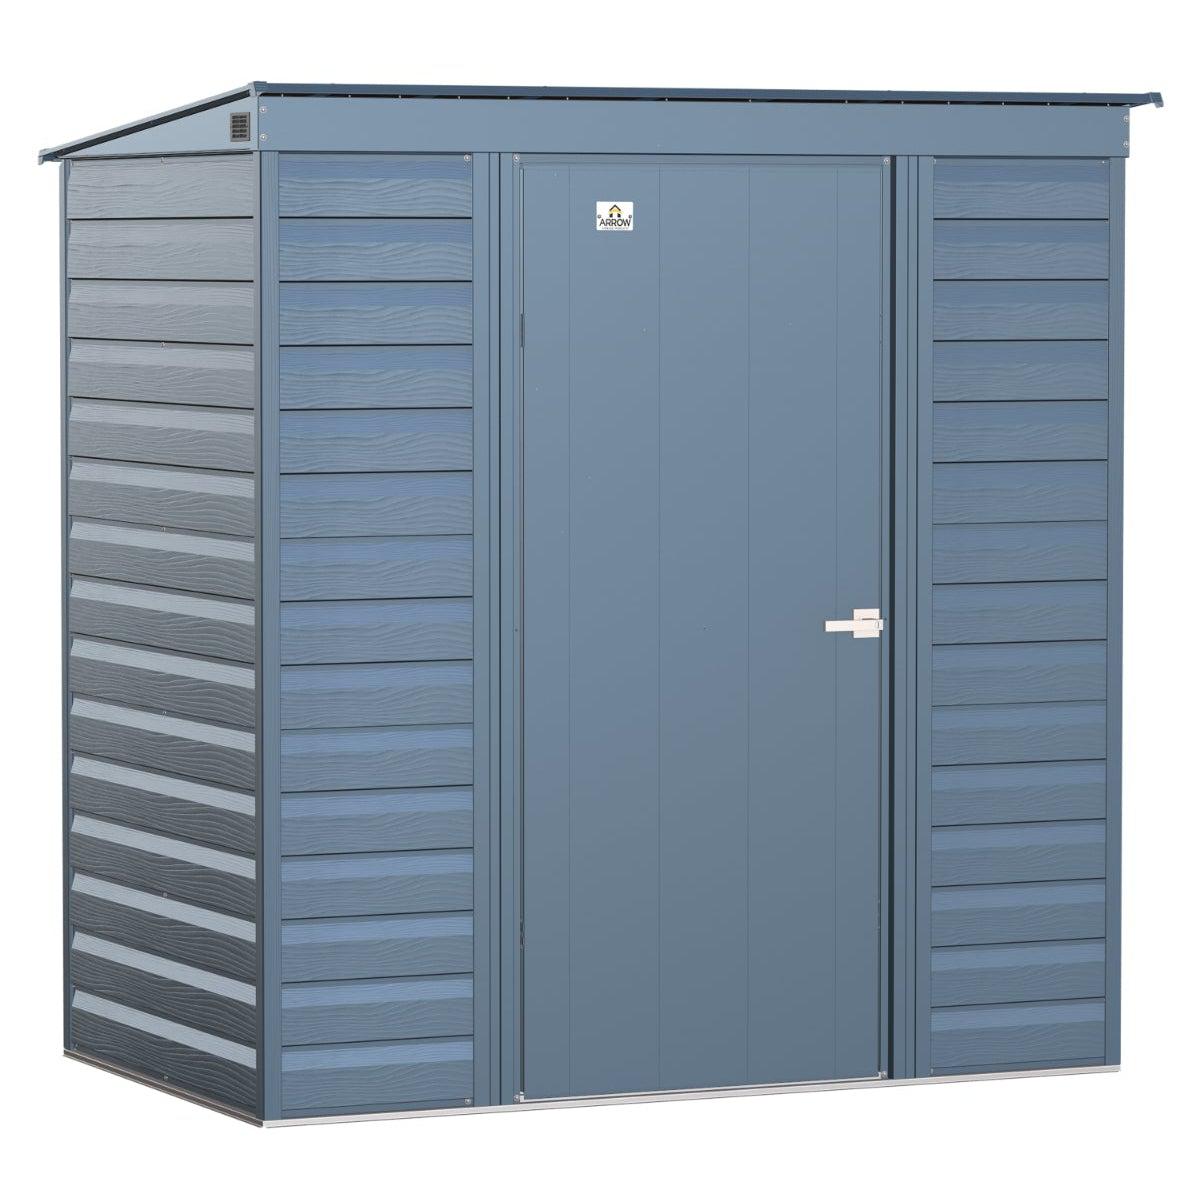 Arrow Select Steel Storage Shed 6 x 4 ft. | Pent Roof - Delightful Yard